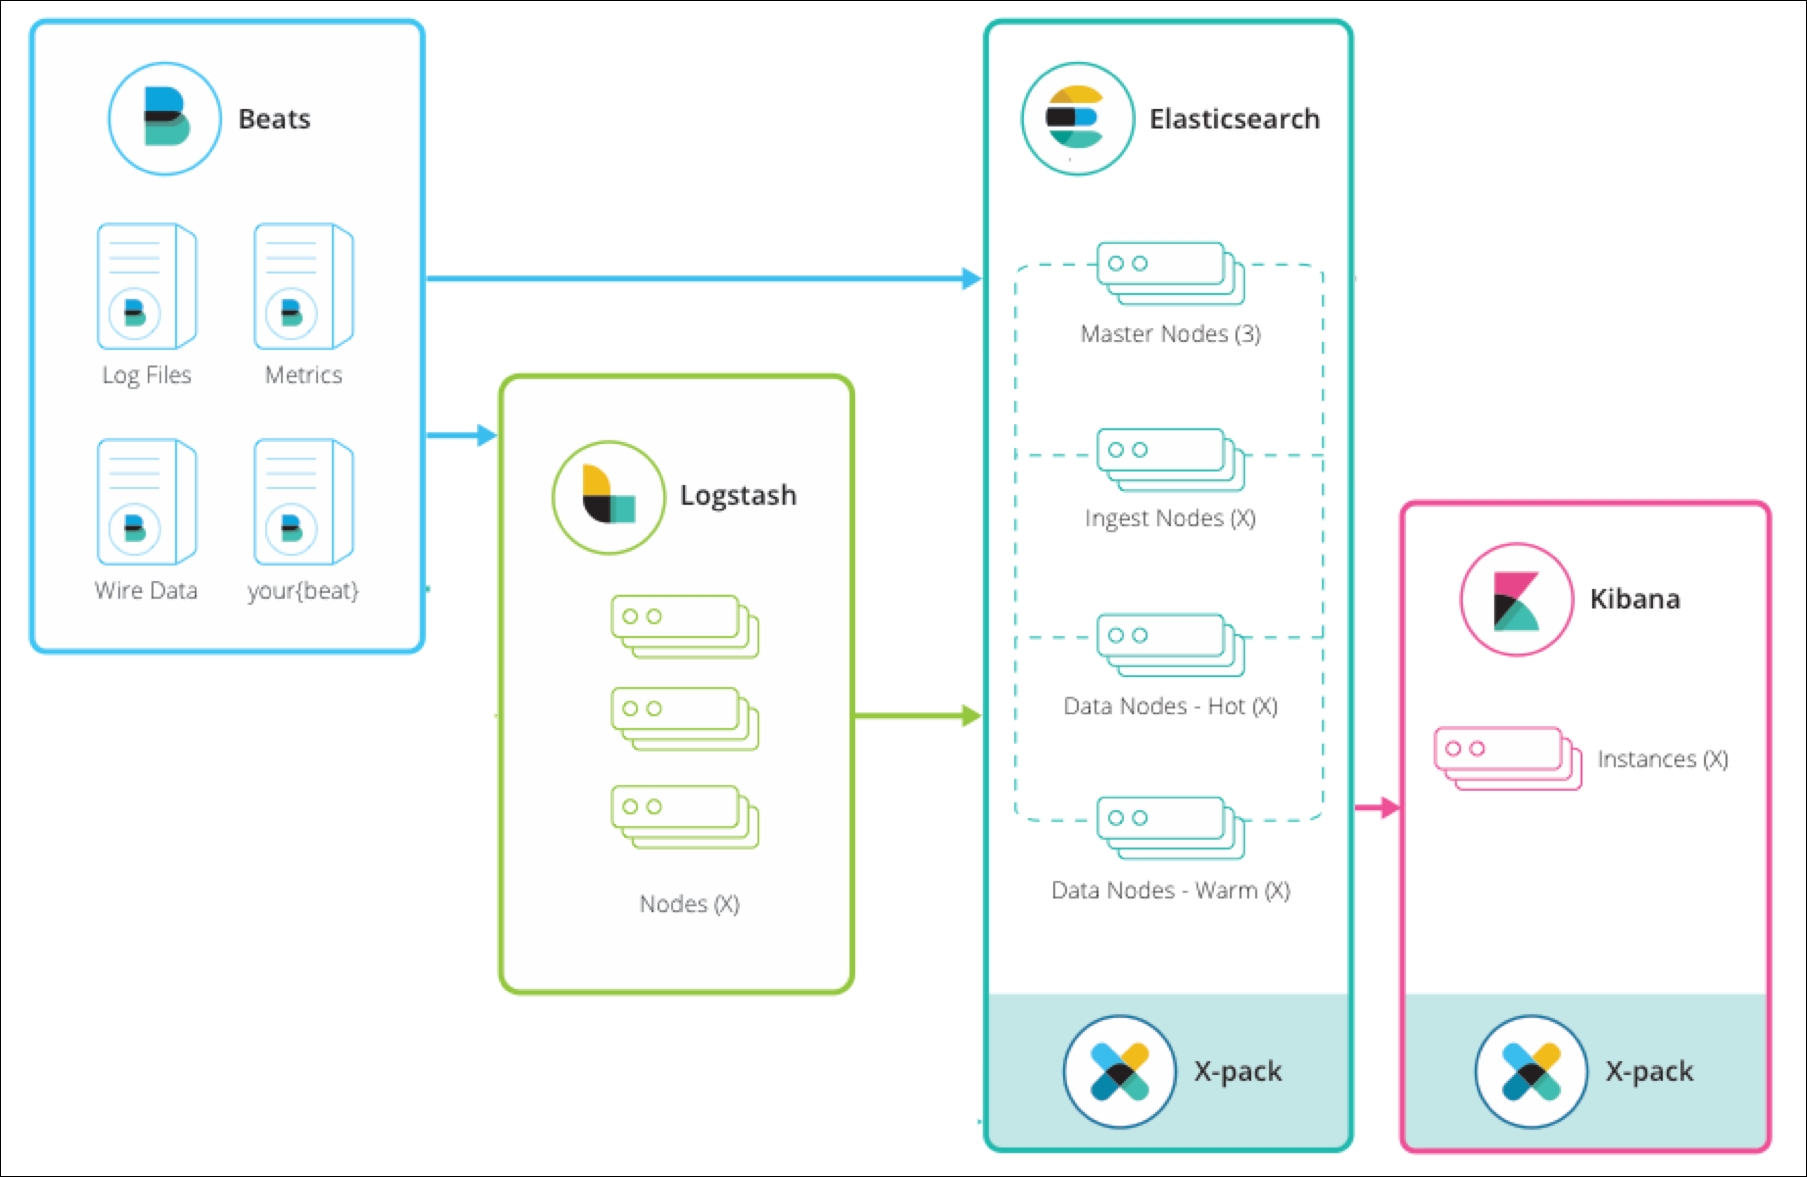 Overview of the Elastic stack